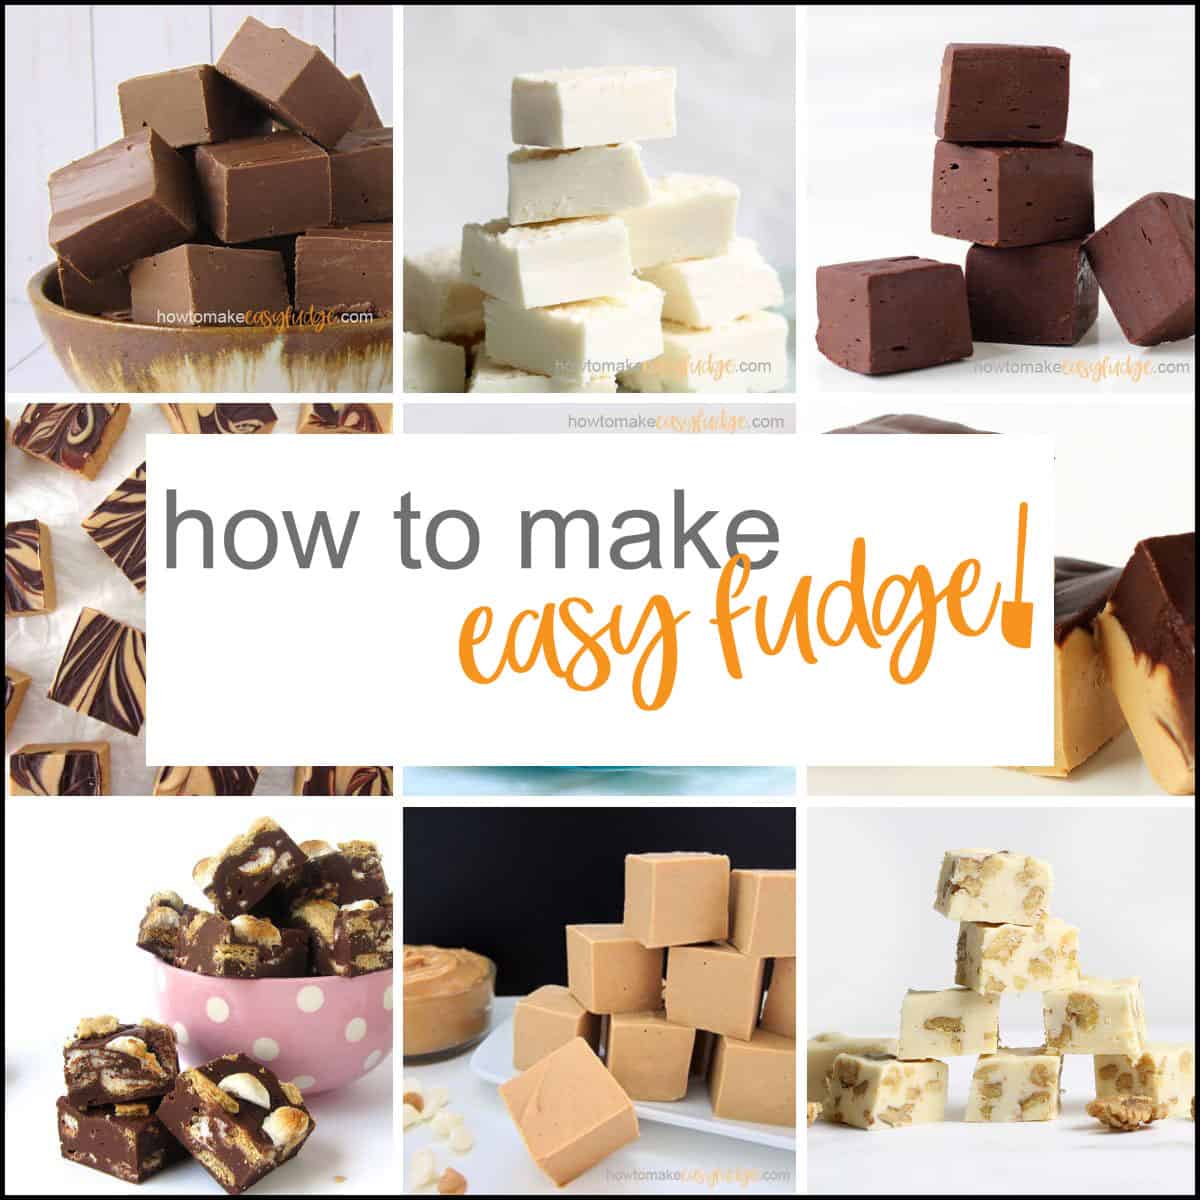 How to Make Easy Fudge collage of easy fudge recipes